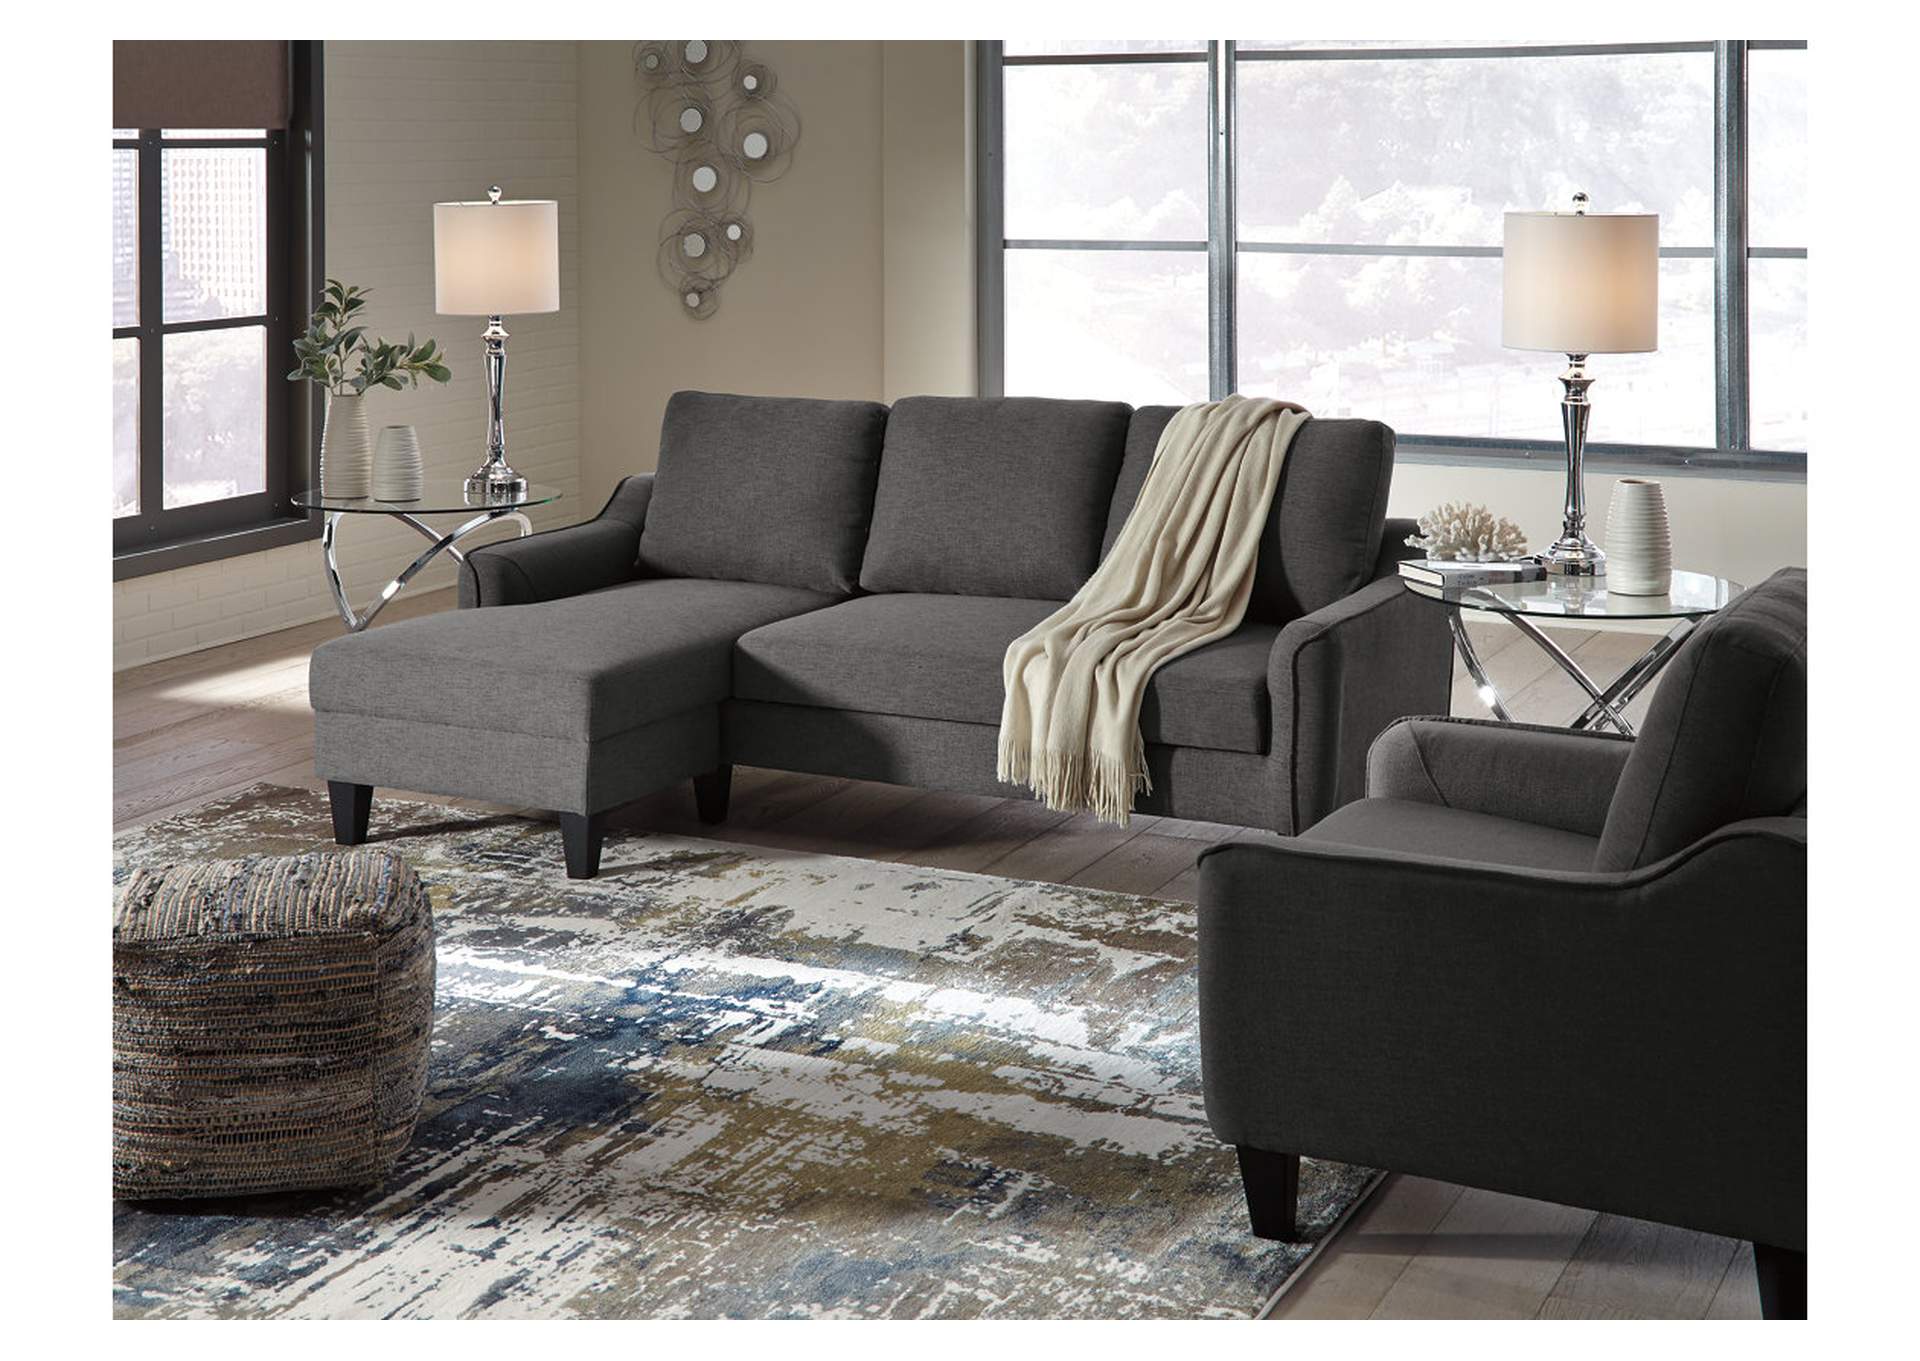 Jarreau Sofa Chaise and Chair,Signature Design By Ashley